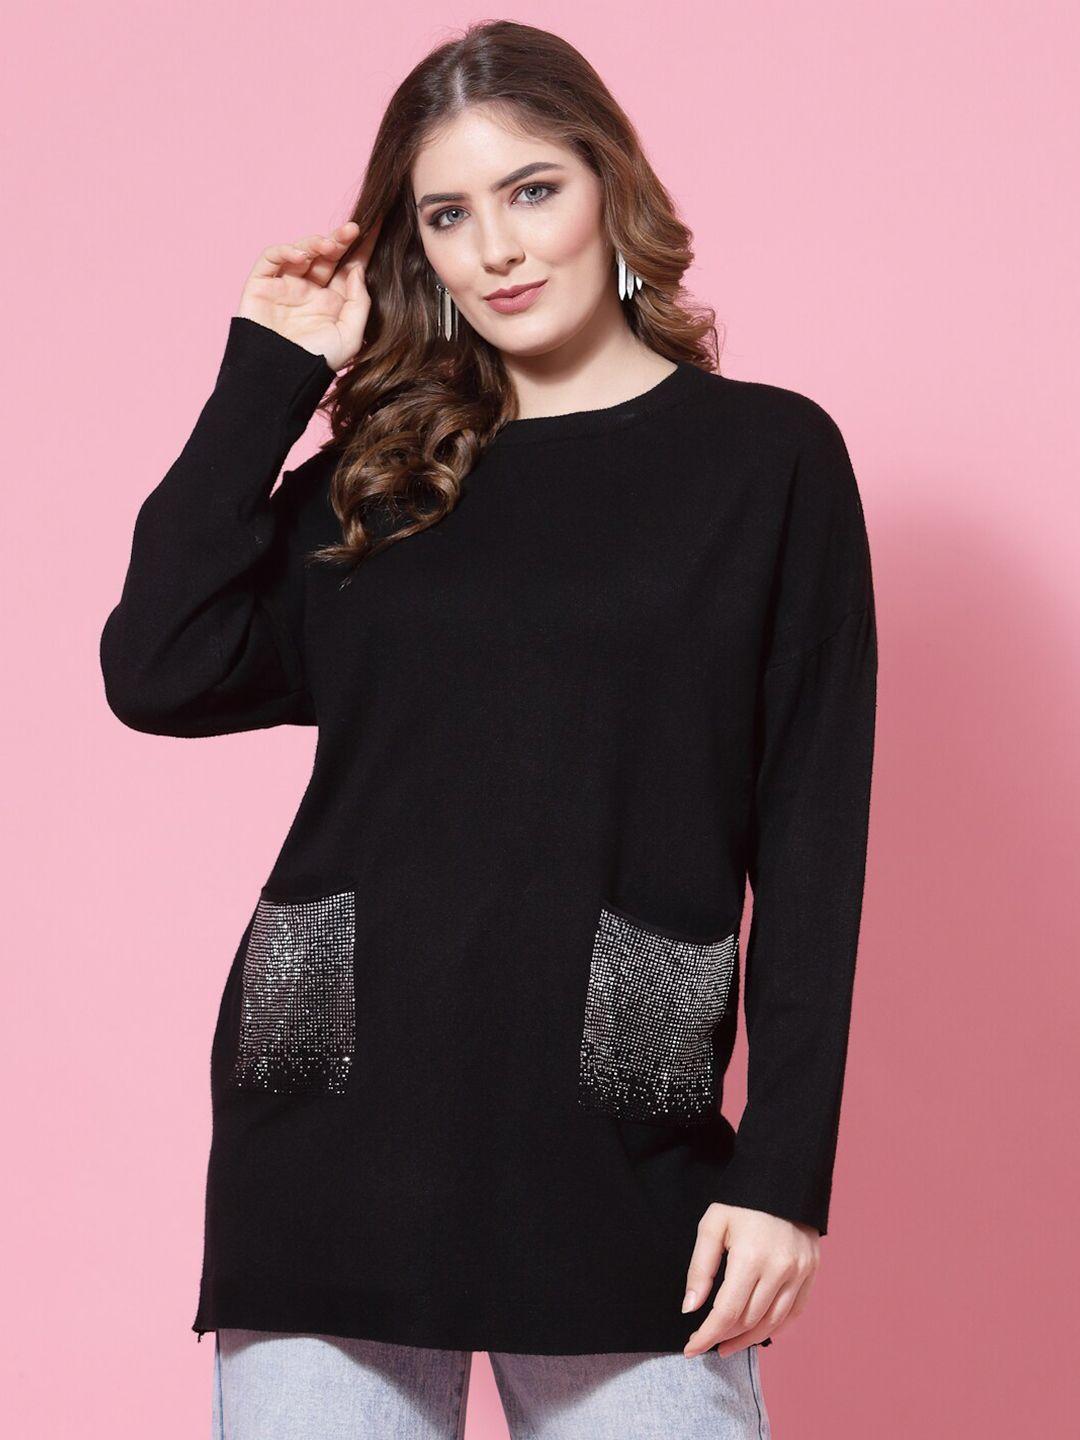 mafadeny women black & silver-toned longline pullover with embellished detail